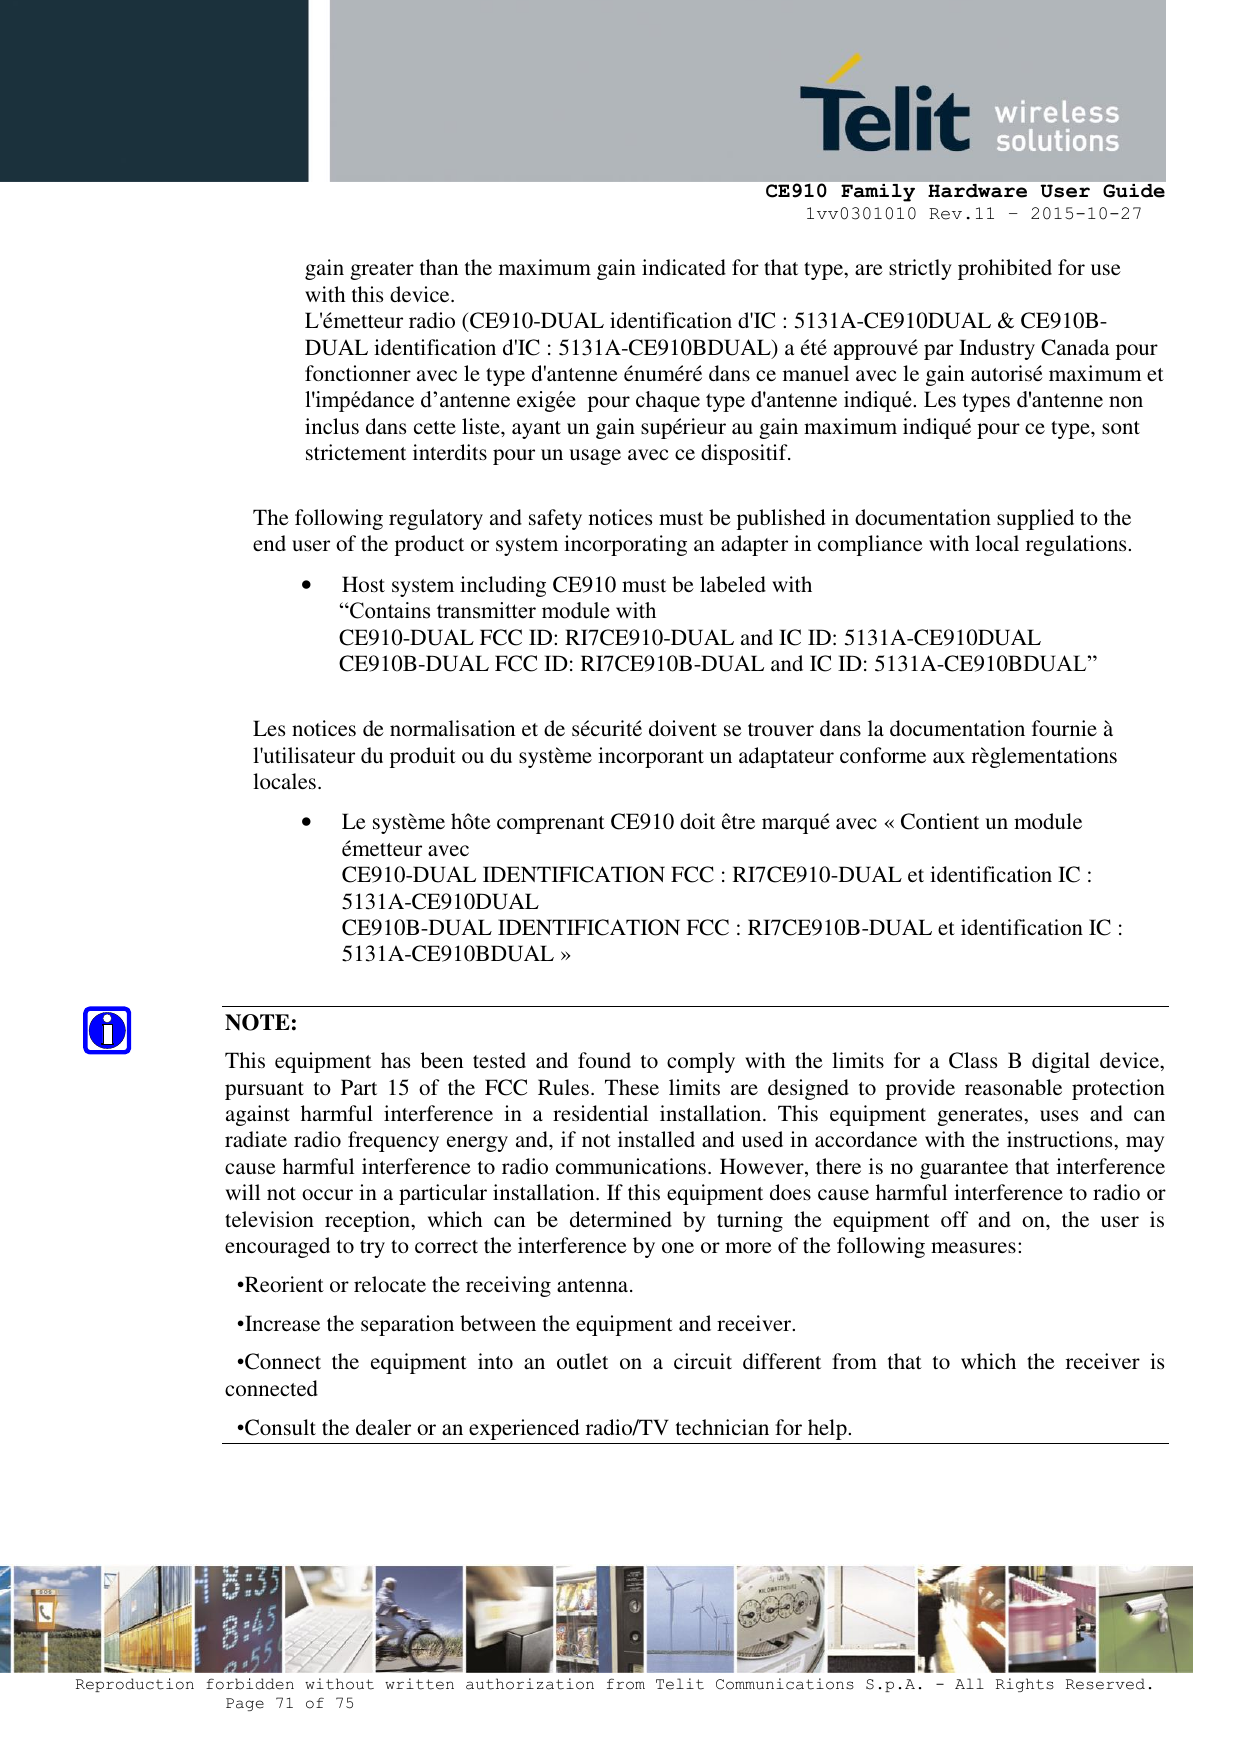     CE910 Family Hardware User Guide 1vv0301010 Rev.11 – 2015-10-27 Reproduction forbidden without written authorization from Telit Communications S.p.A. - All Rights Reserved.    Page 71 of 75                                                     gain greater than the maximum gain indicated for that type, are strictly prohibited for use with this device. L&apos;émetteur radio (CE910-DUAL identification d&apos;IC : 5131A-CE910DUAL &amp; CE910B-DUAL identification d&apos;IC : 5131A-CE910BDUAL) a été approuvé par Industry Canada pour fonctionner avec le type d&apos;antenne énuméré dans ce manuel avec le gain autorisé maximum et l&apos;impédance d’antenne exigée  pour chaque type d&apos;antenne indiqué. Les types d&apos;antenne non inclus dans cette liste, ayant un gain supérieur au gain maximum indiqué pour ce type, sont strictement interdits pour un usage avec ce dispositif.  The following regulatory and safety notices must be published in documentation supplied to the end user of the product or system incorporating an adapter in compliance with local regulations. • Host system including CE910 must be labeled with “Contains transmitter module with  CE910-DUAL FCC ID: RI7CE910-DUAL and IC ID: 5131A-CE910DUAL CE910B-DUAL FCC ID: RI7CE910B-DUAL and IC ID: 5131A-CE910BDUAL”  Les notices de normalisation et de sécurité doivent se trouver dans la documentation fournie à l&apos;utilisateur du produit ou du système incorporant un adaptateur conforme aux règlementations locales. • Le système hôte comprenant CE910 doit être marqué avec « Contient un module émetteur avec CE910-DUAL IDENTIFICATION FCC : RI7CE910-DUAL et identification IC : 5131A-CE910DUAL  CE910B-DUAL IDENTIFICATION FCC : RI7CE910B-DUAL et identification IC : 5131A-CE910BDUAL »  NOTE: This equipment has  been tested  and  found to  comply  with  the limits for  a Class  B digital device, pursuant  to  Part  15  of  the FCC  Rules. These limits are  designed to  provide  reasonable  protection against  harmful  interference  in  a  residential  installation.  This  equipment  generates,  uses  and  can radiate radio frequency energy and, if not installed and used in accordance with the instructions, may cause harmful interference to radio communications. However, there is no guarantee that interference will not occur in a particular installation. If this equipment does cause harmful interference to radio or television  reception,  which  can  be  determined  by  turning  the  equipment  off  and  on,  the  user  is encouraged to try to correct the interference by one or more of the following measures:   •Reorient or relocate the receiving antenna. •Increase the separation between the equipment and receiver. •Connect  the  equipment  into  an  outlet  on  a  circuit  different  from  that  to  which  the  receiver  is connected •Consult the dealer or an experienced radio/TV technician for help.    